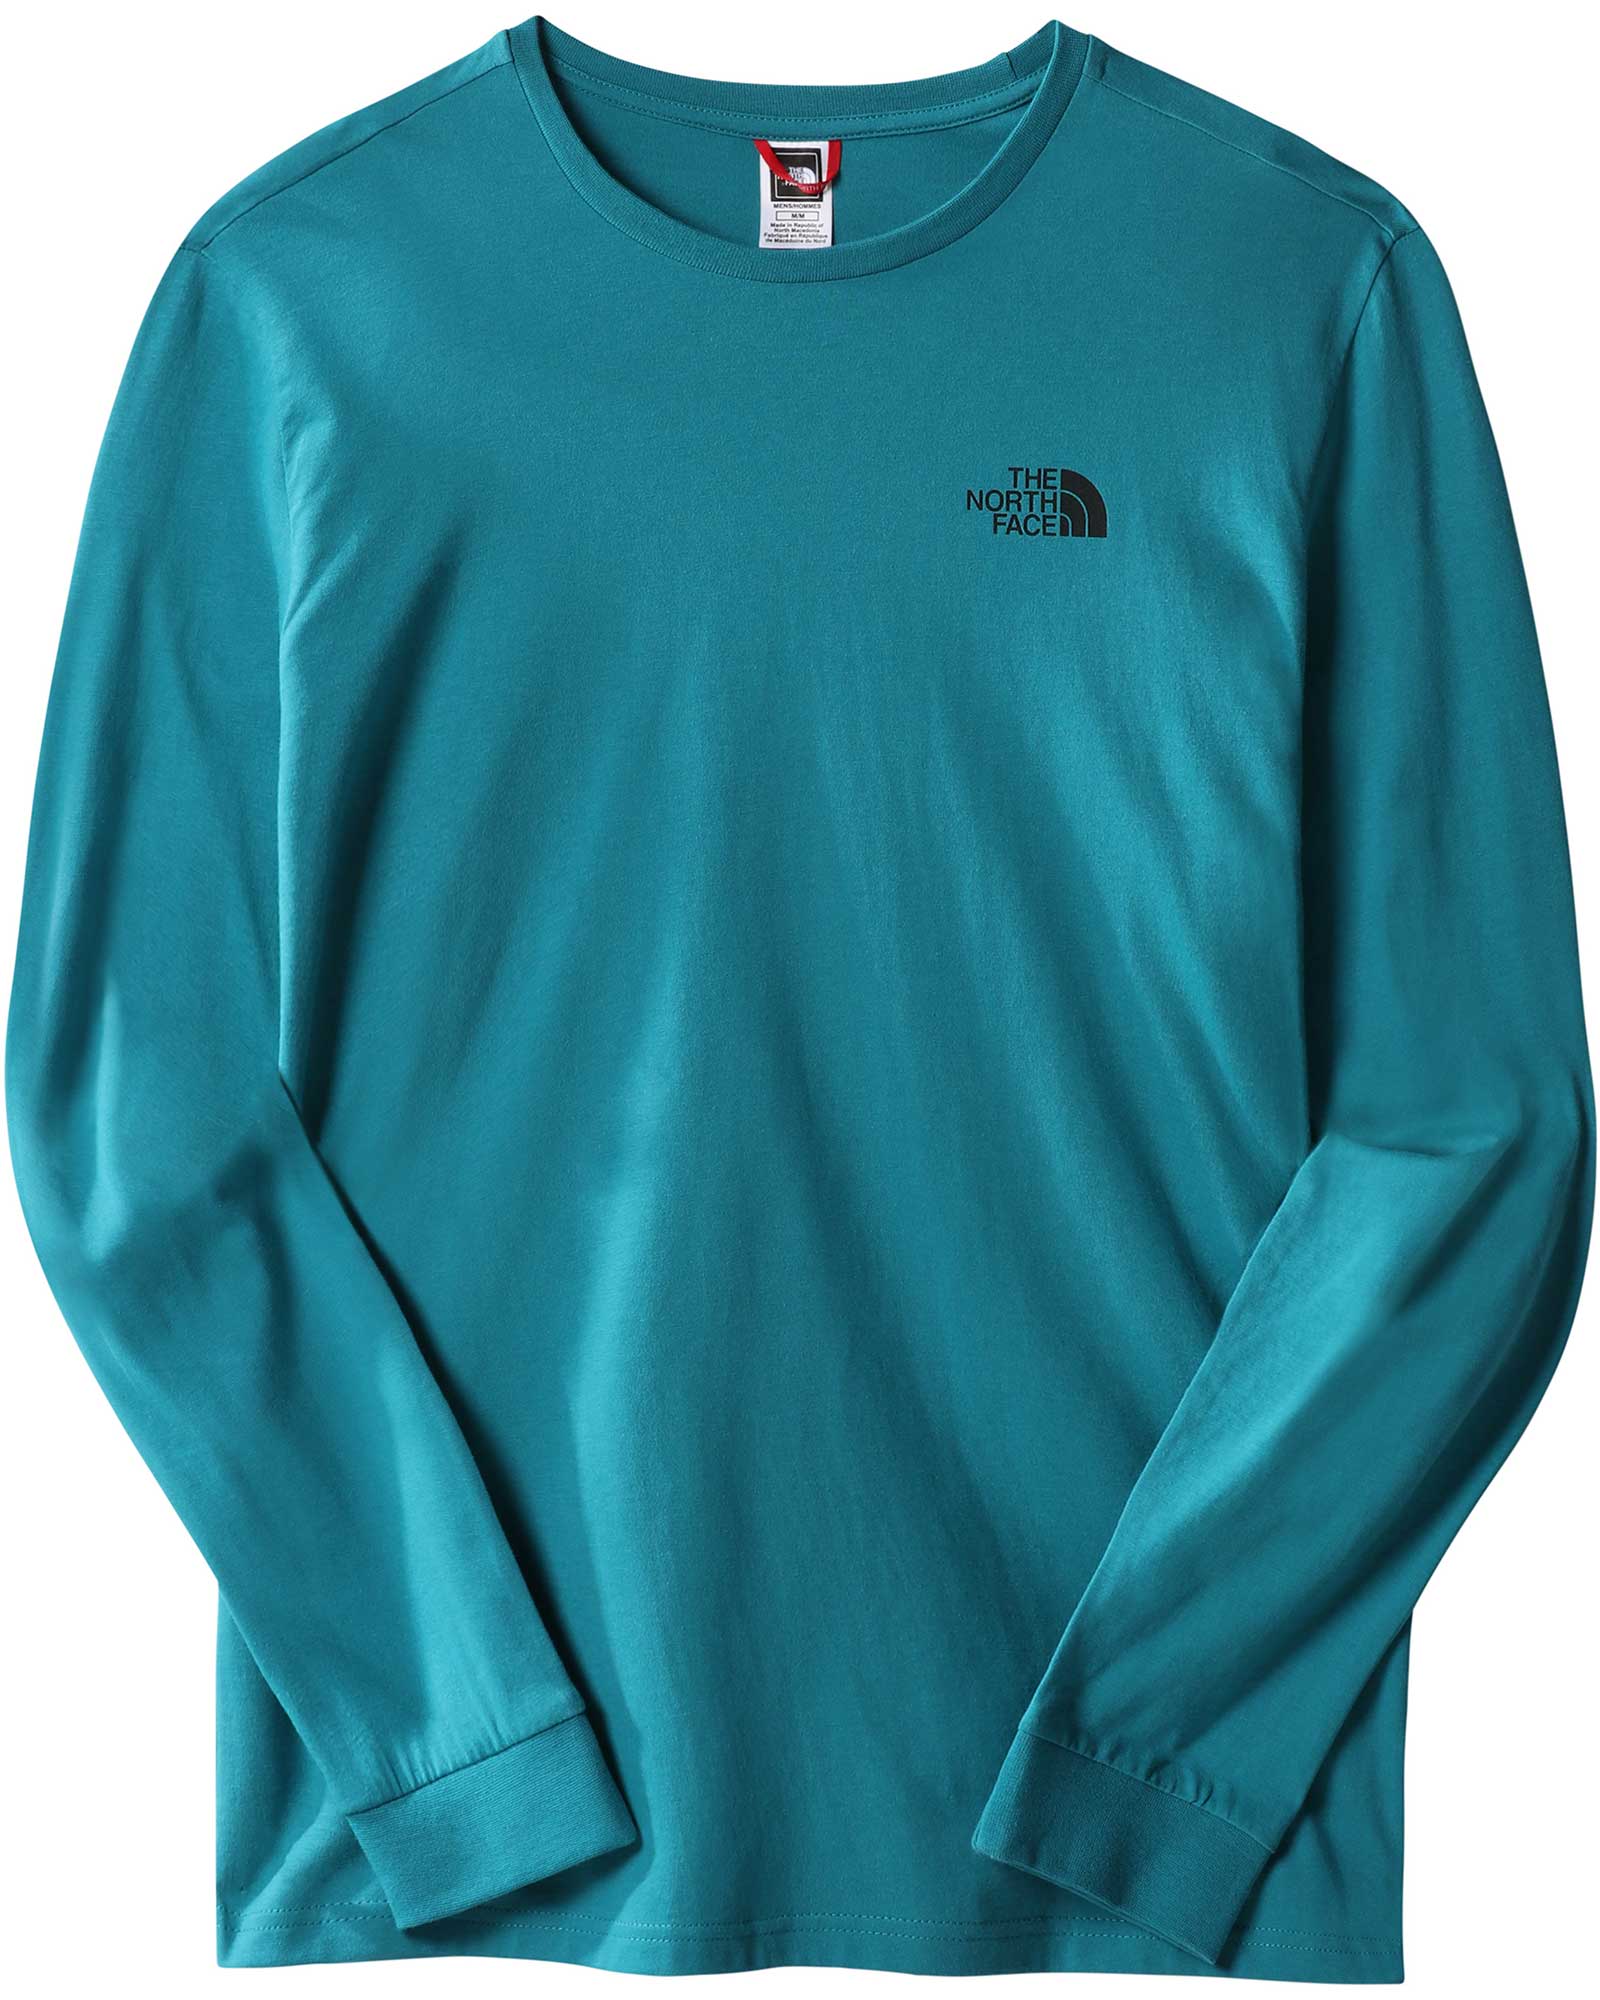 The North Face Simple Dome Men’s Long Sleeve T Shirt - Harbor Blue S